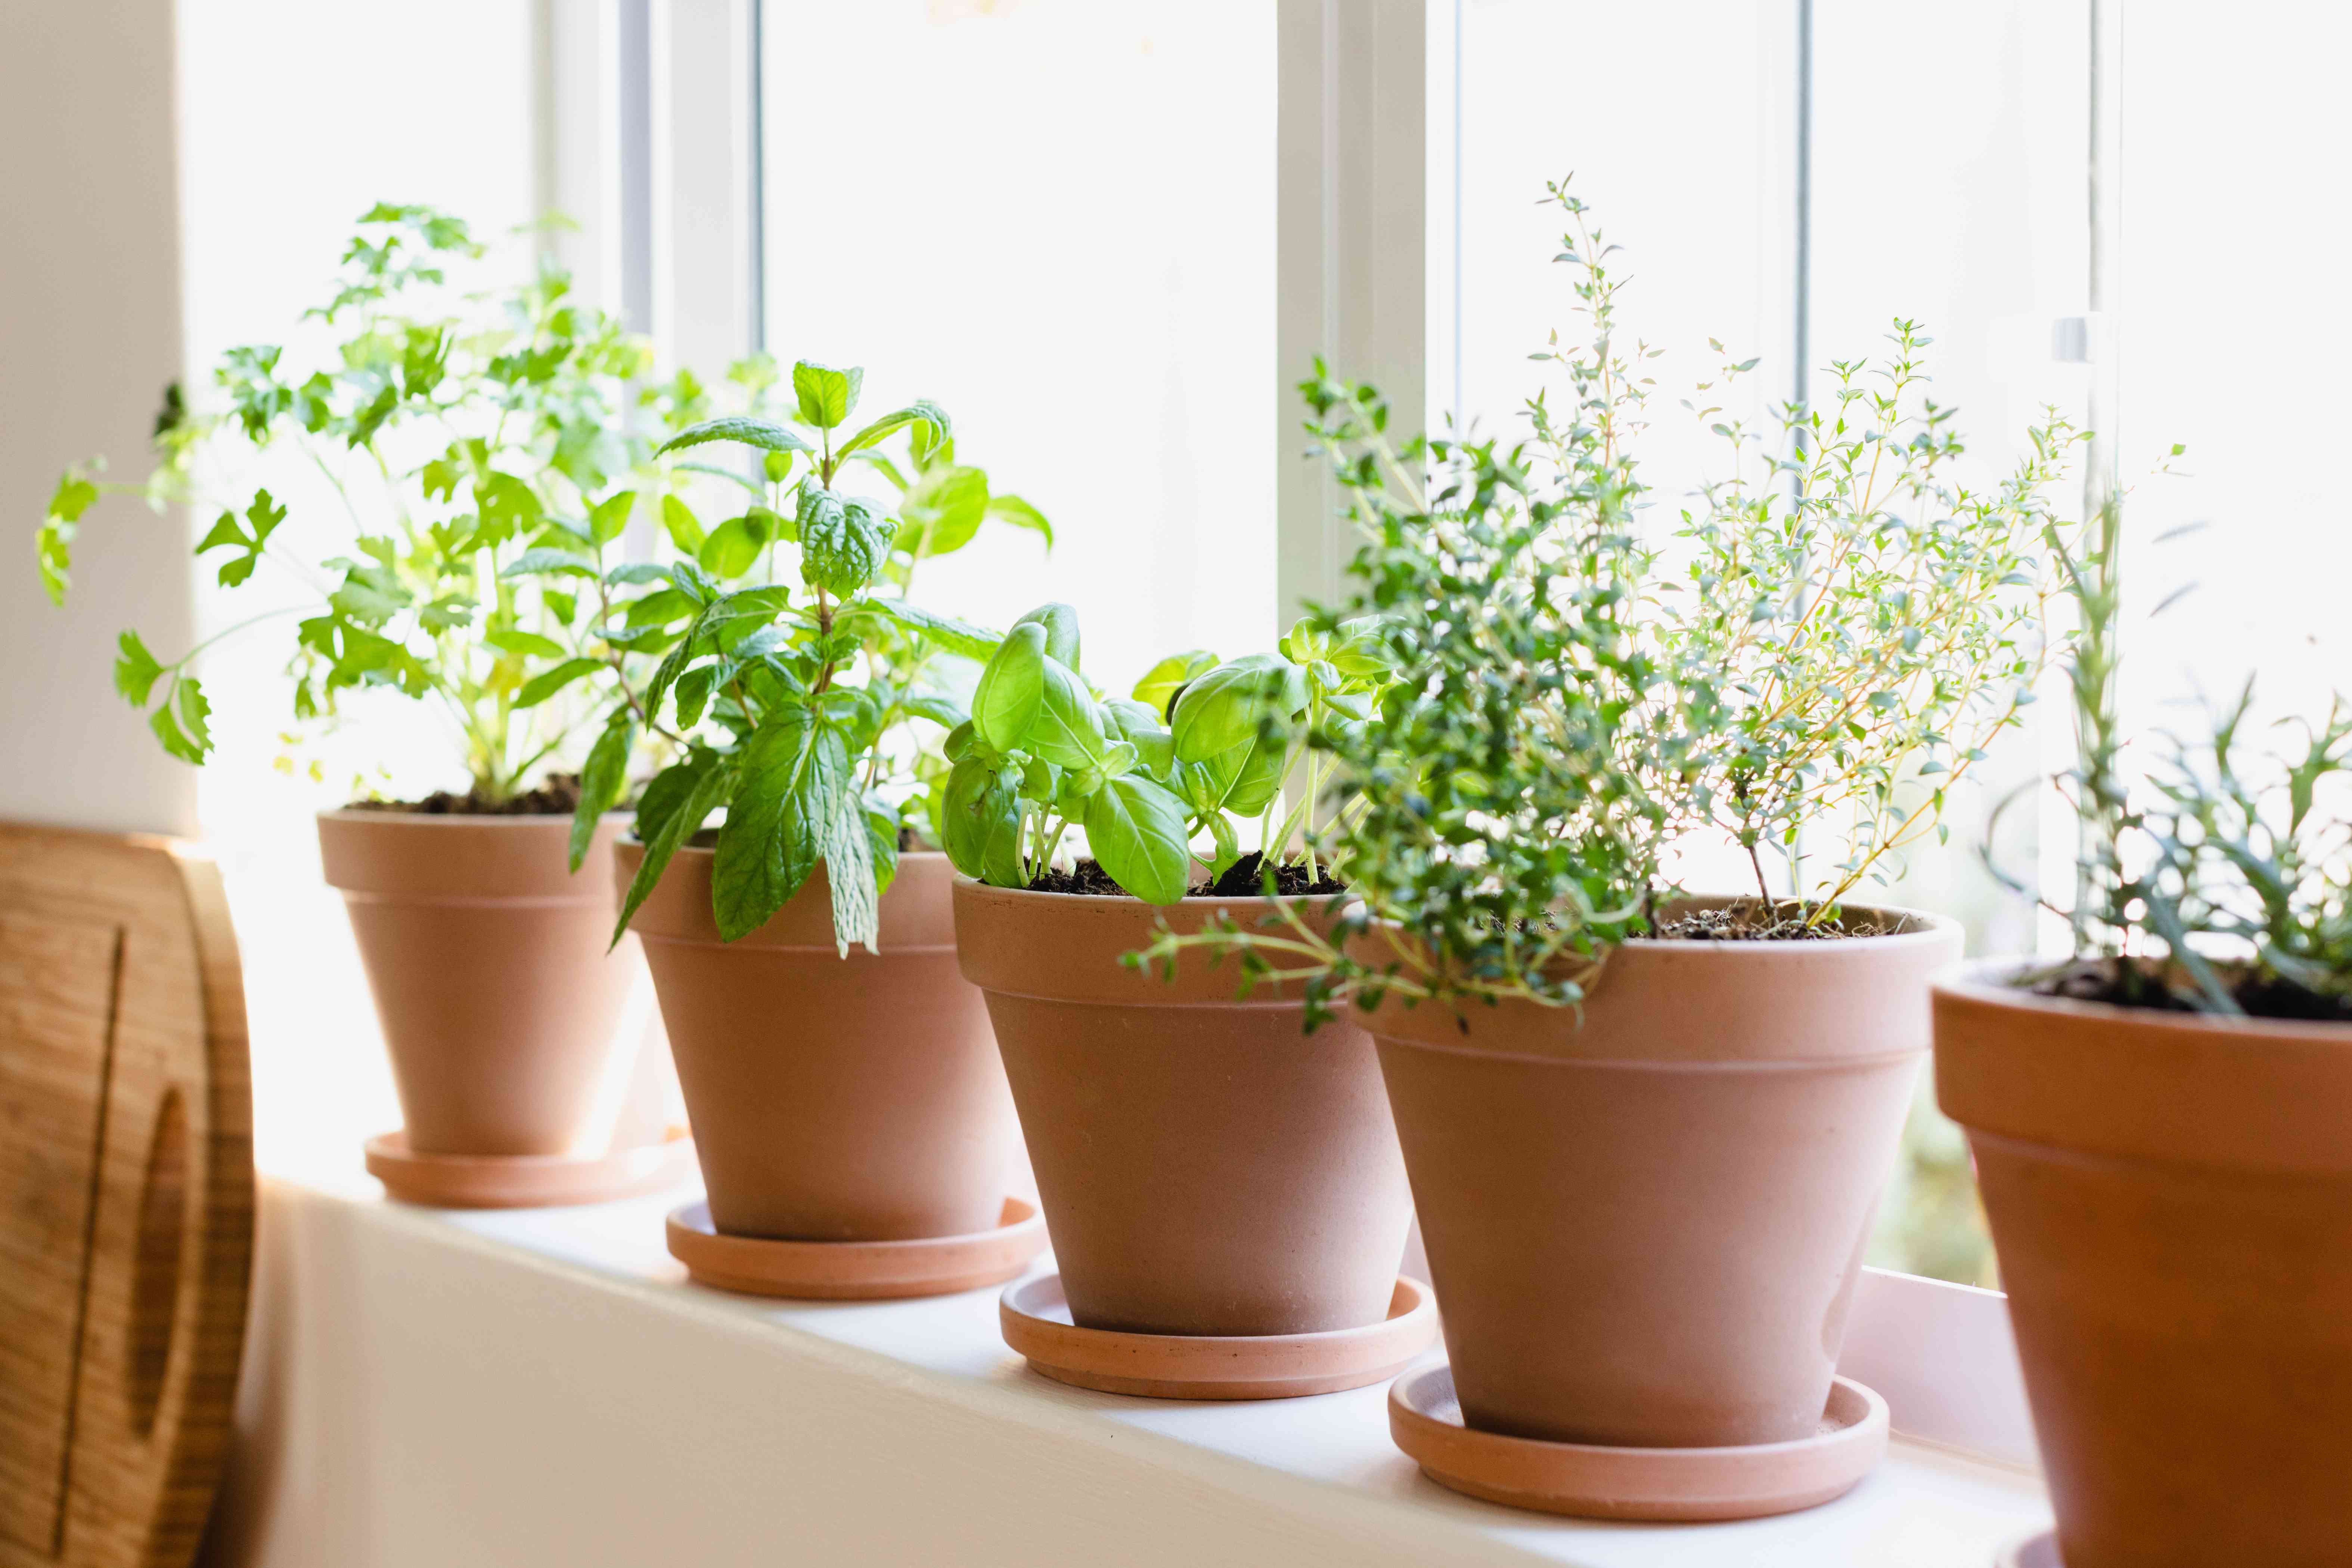 What Are The Best Herbs To Grow Indoors